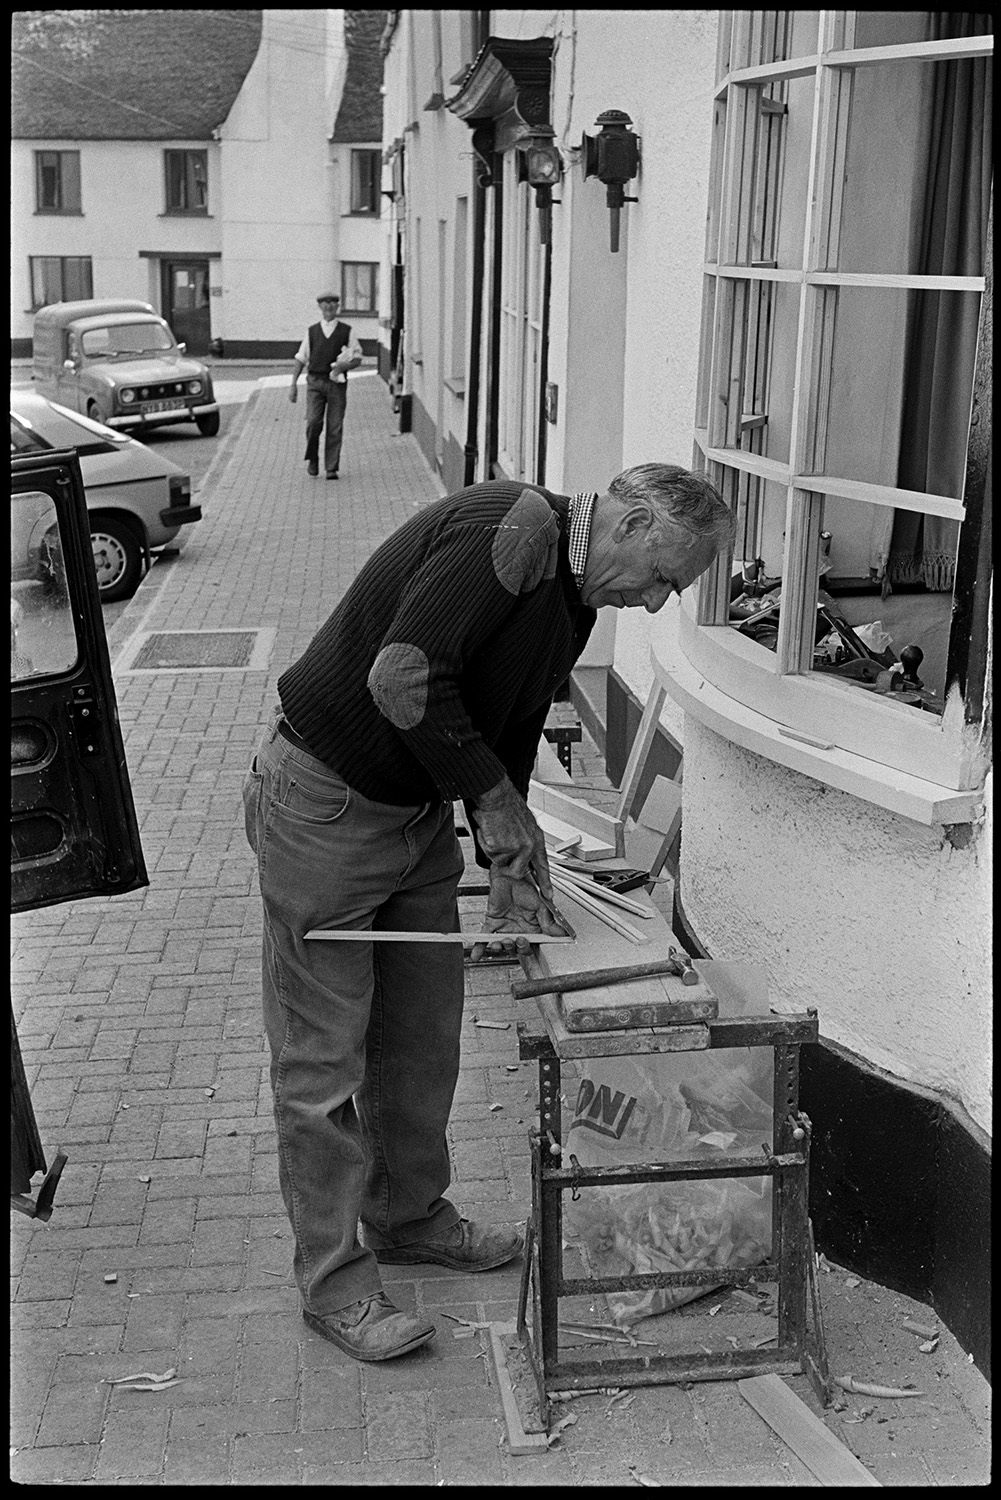 Man mending widow in village street. 
[A man fixing the window frame of a house in Winkleigh. He has a work bench set up on the pavement in front of the bay window. Another man is walking down the street towards him.]